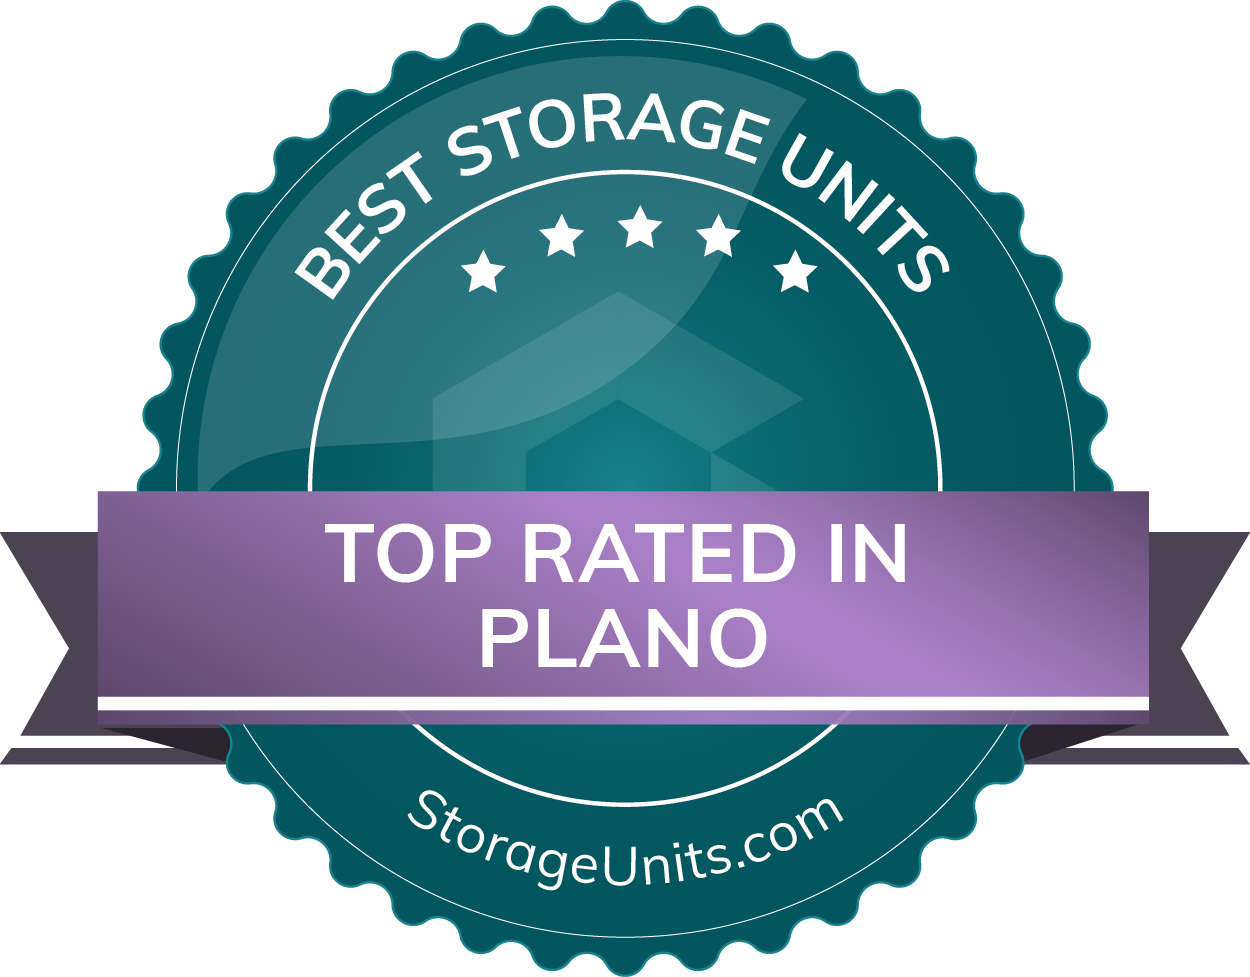 Best Self Storage Units in Plano, Texas of 2022